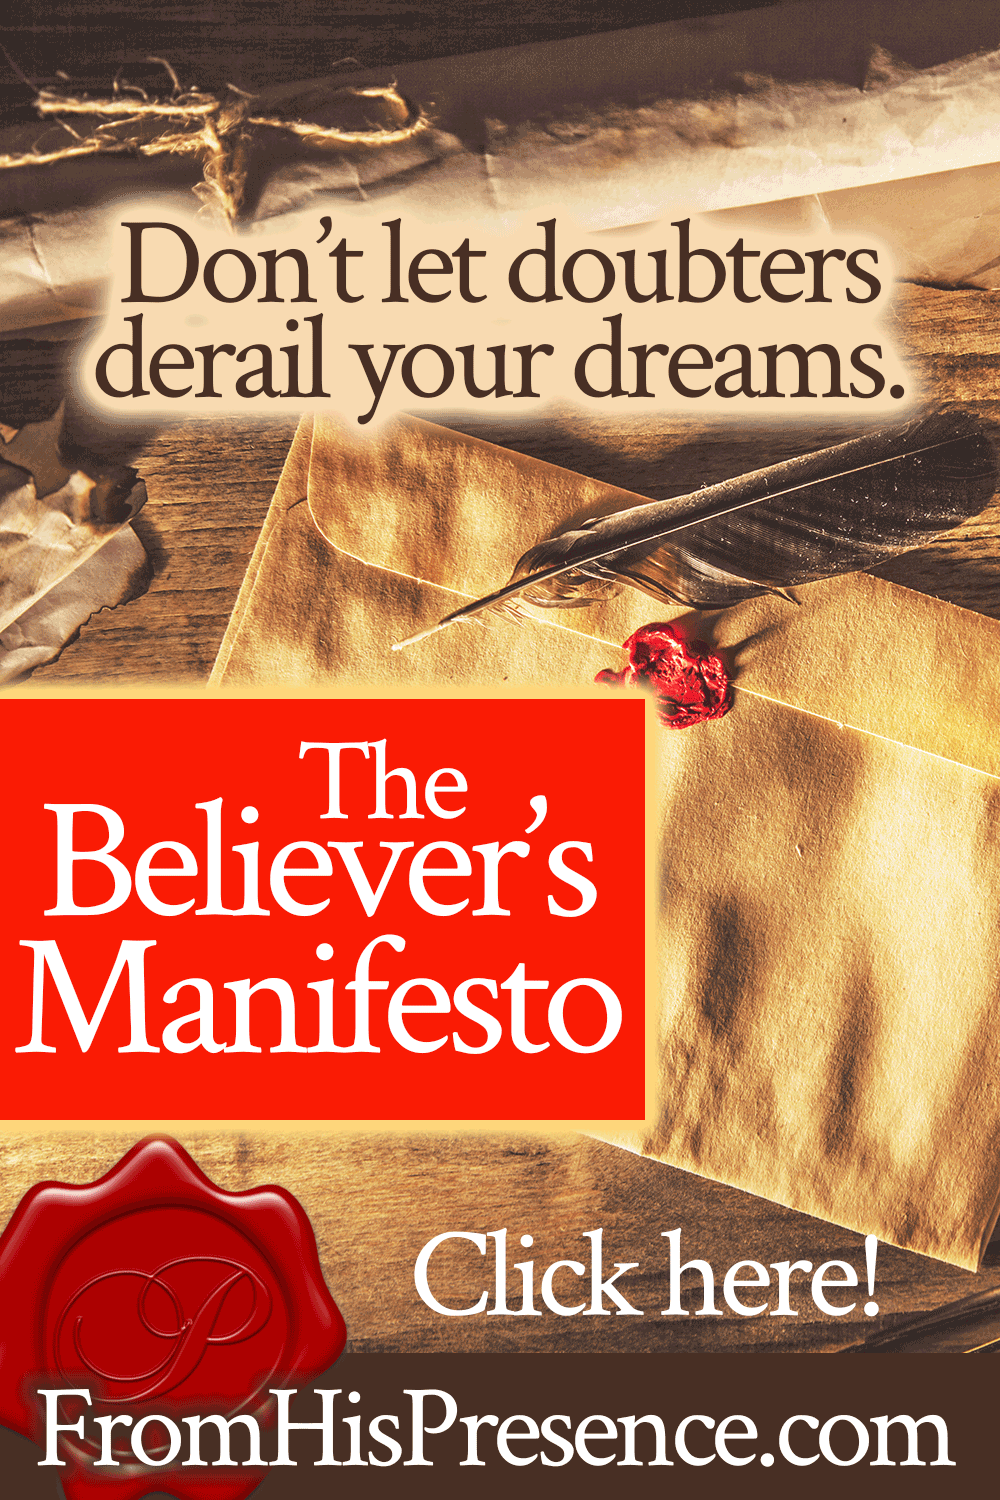 The Believer's Manifesto | FromHisPresence.com | by Jamie Rohrbaugh